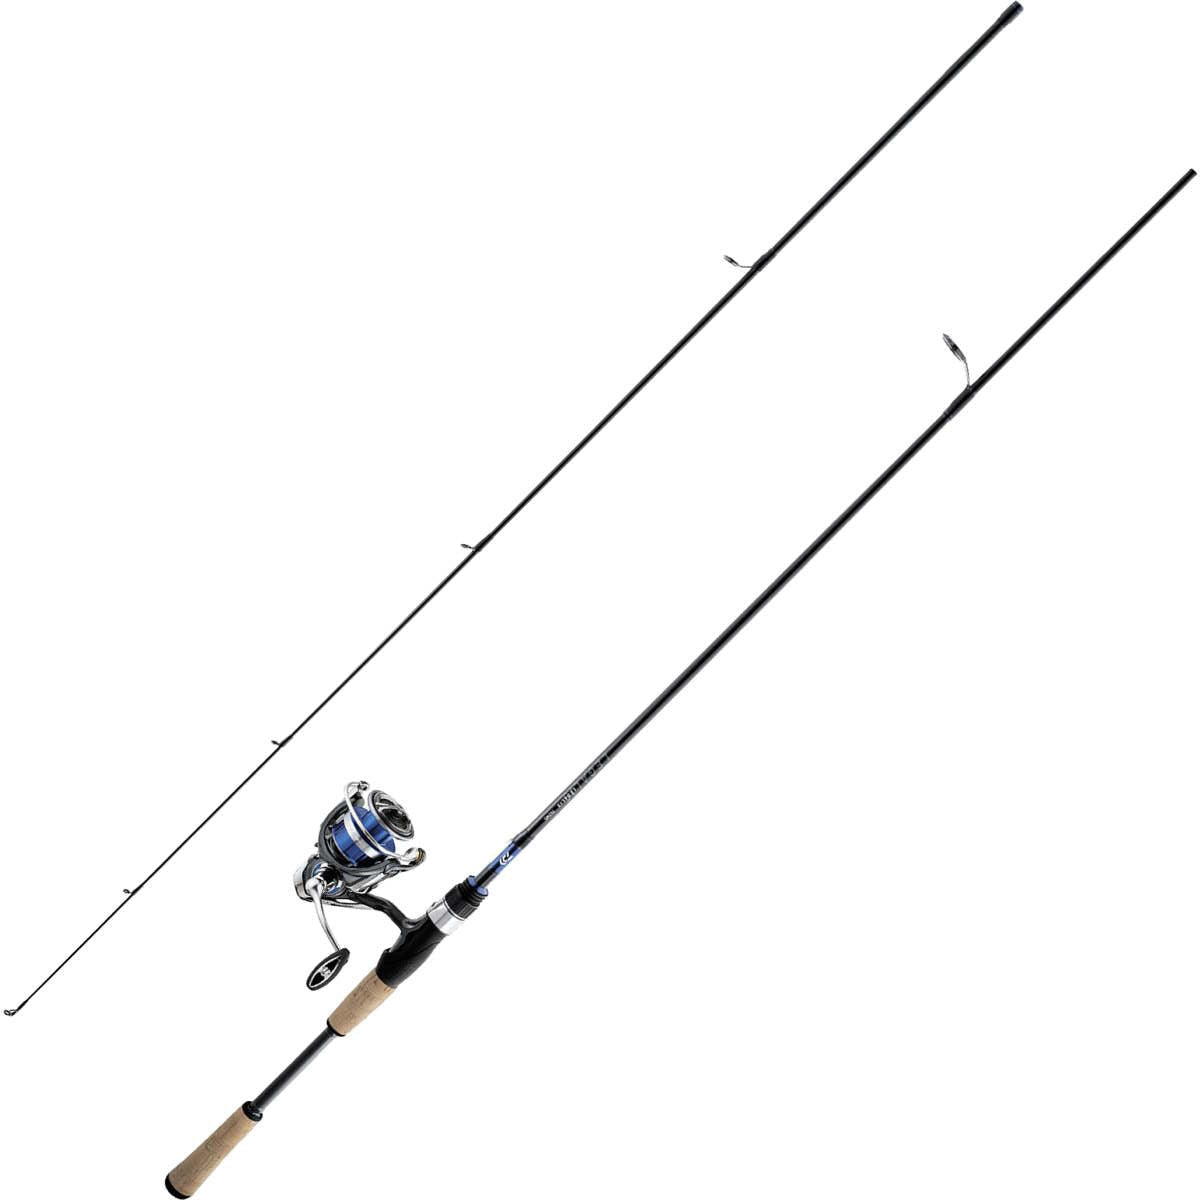 Photo of Daiwa Legalis Spinning Combo for sale at United Tackle Shops.